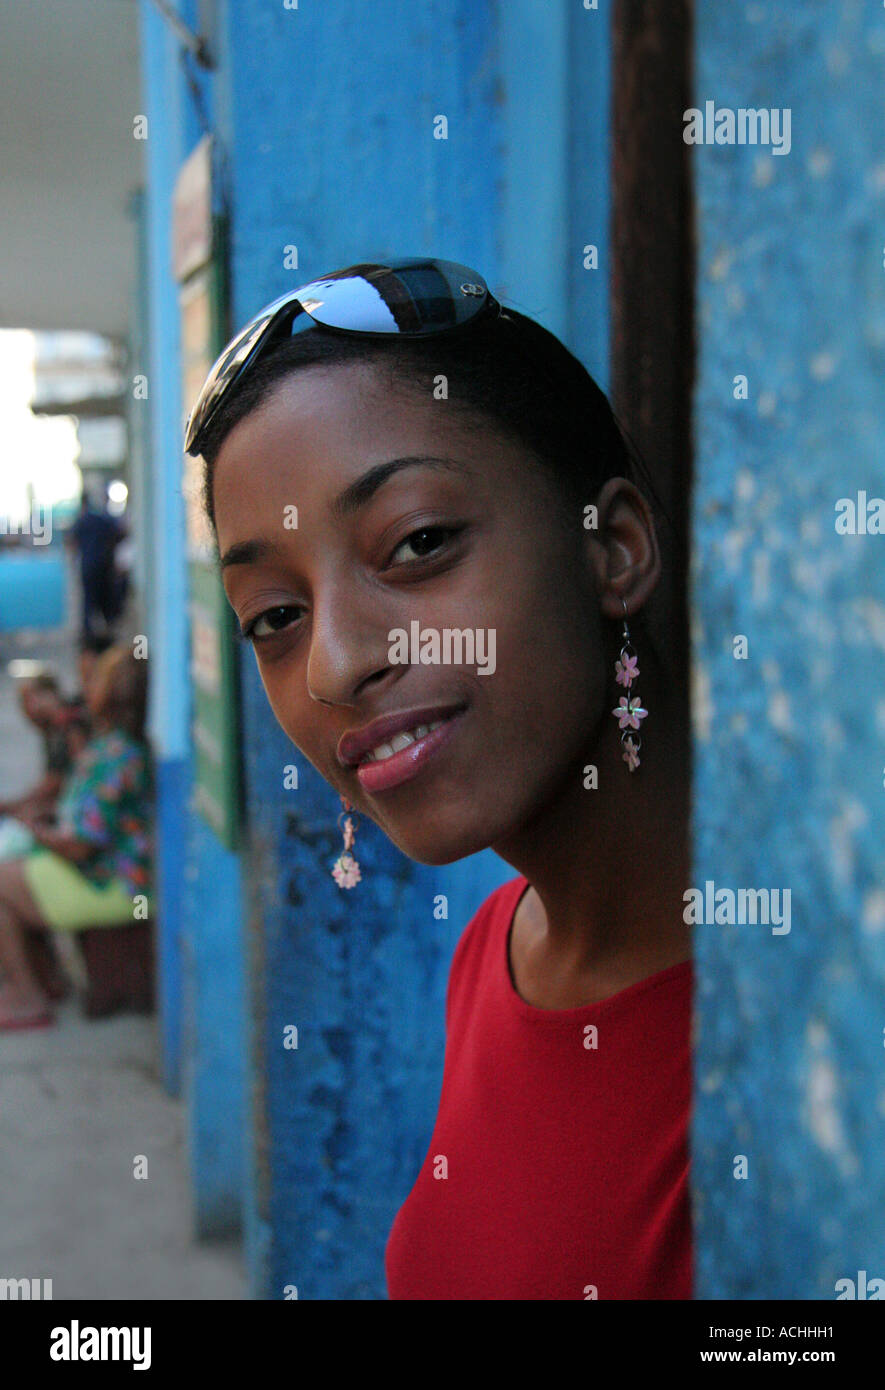 A young cuban prostitute Stock Photo